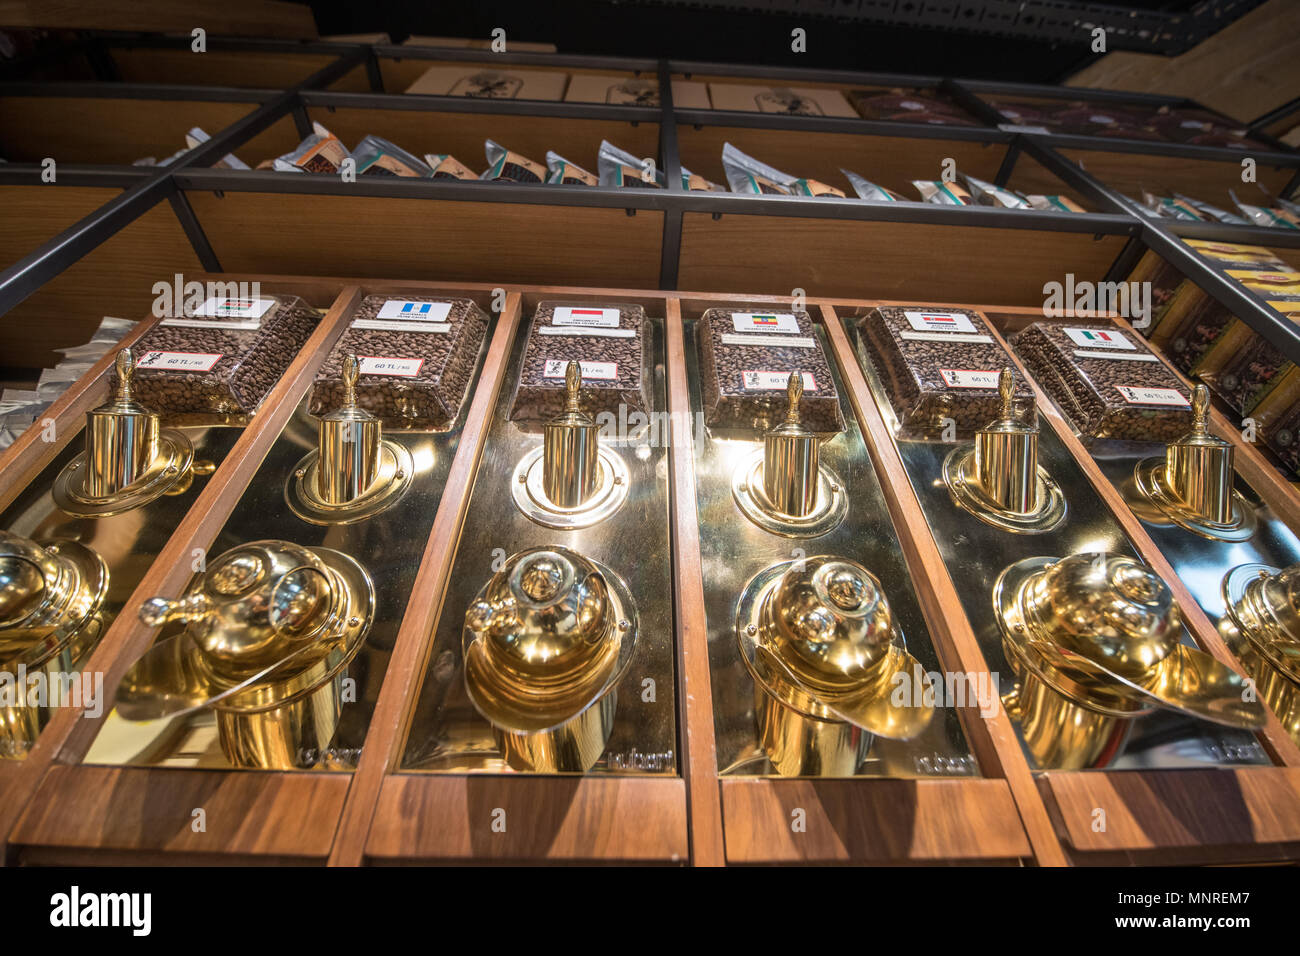 Low angle view of shiny coffee dispensers providing a variety of blends to shoppers, Istanbul, Turkey. Stock Photo